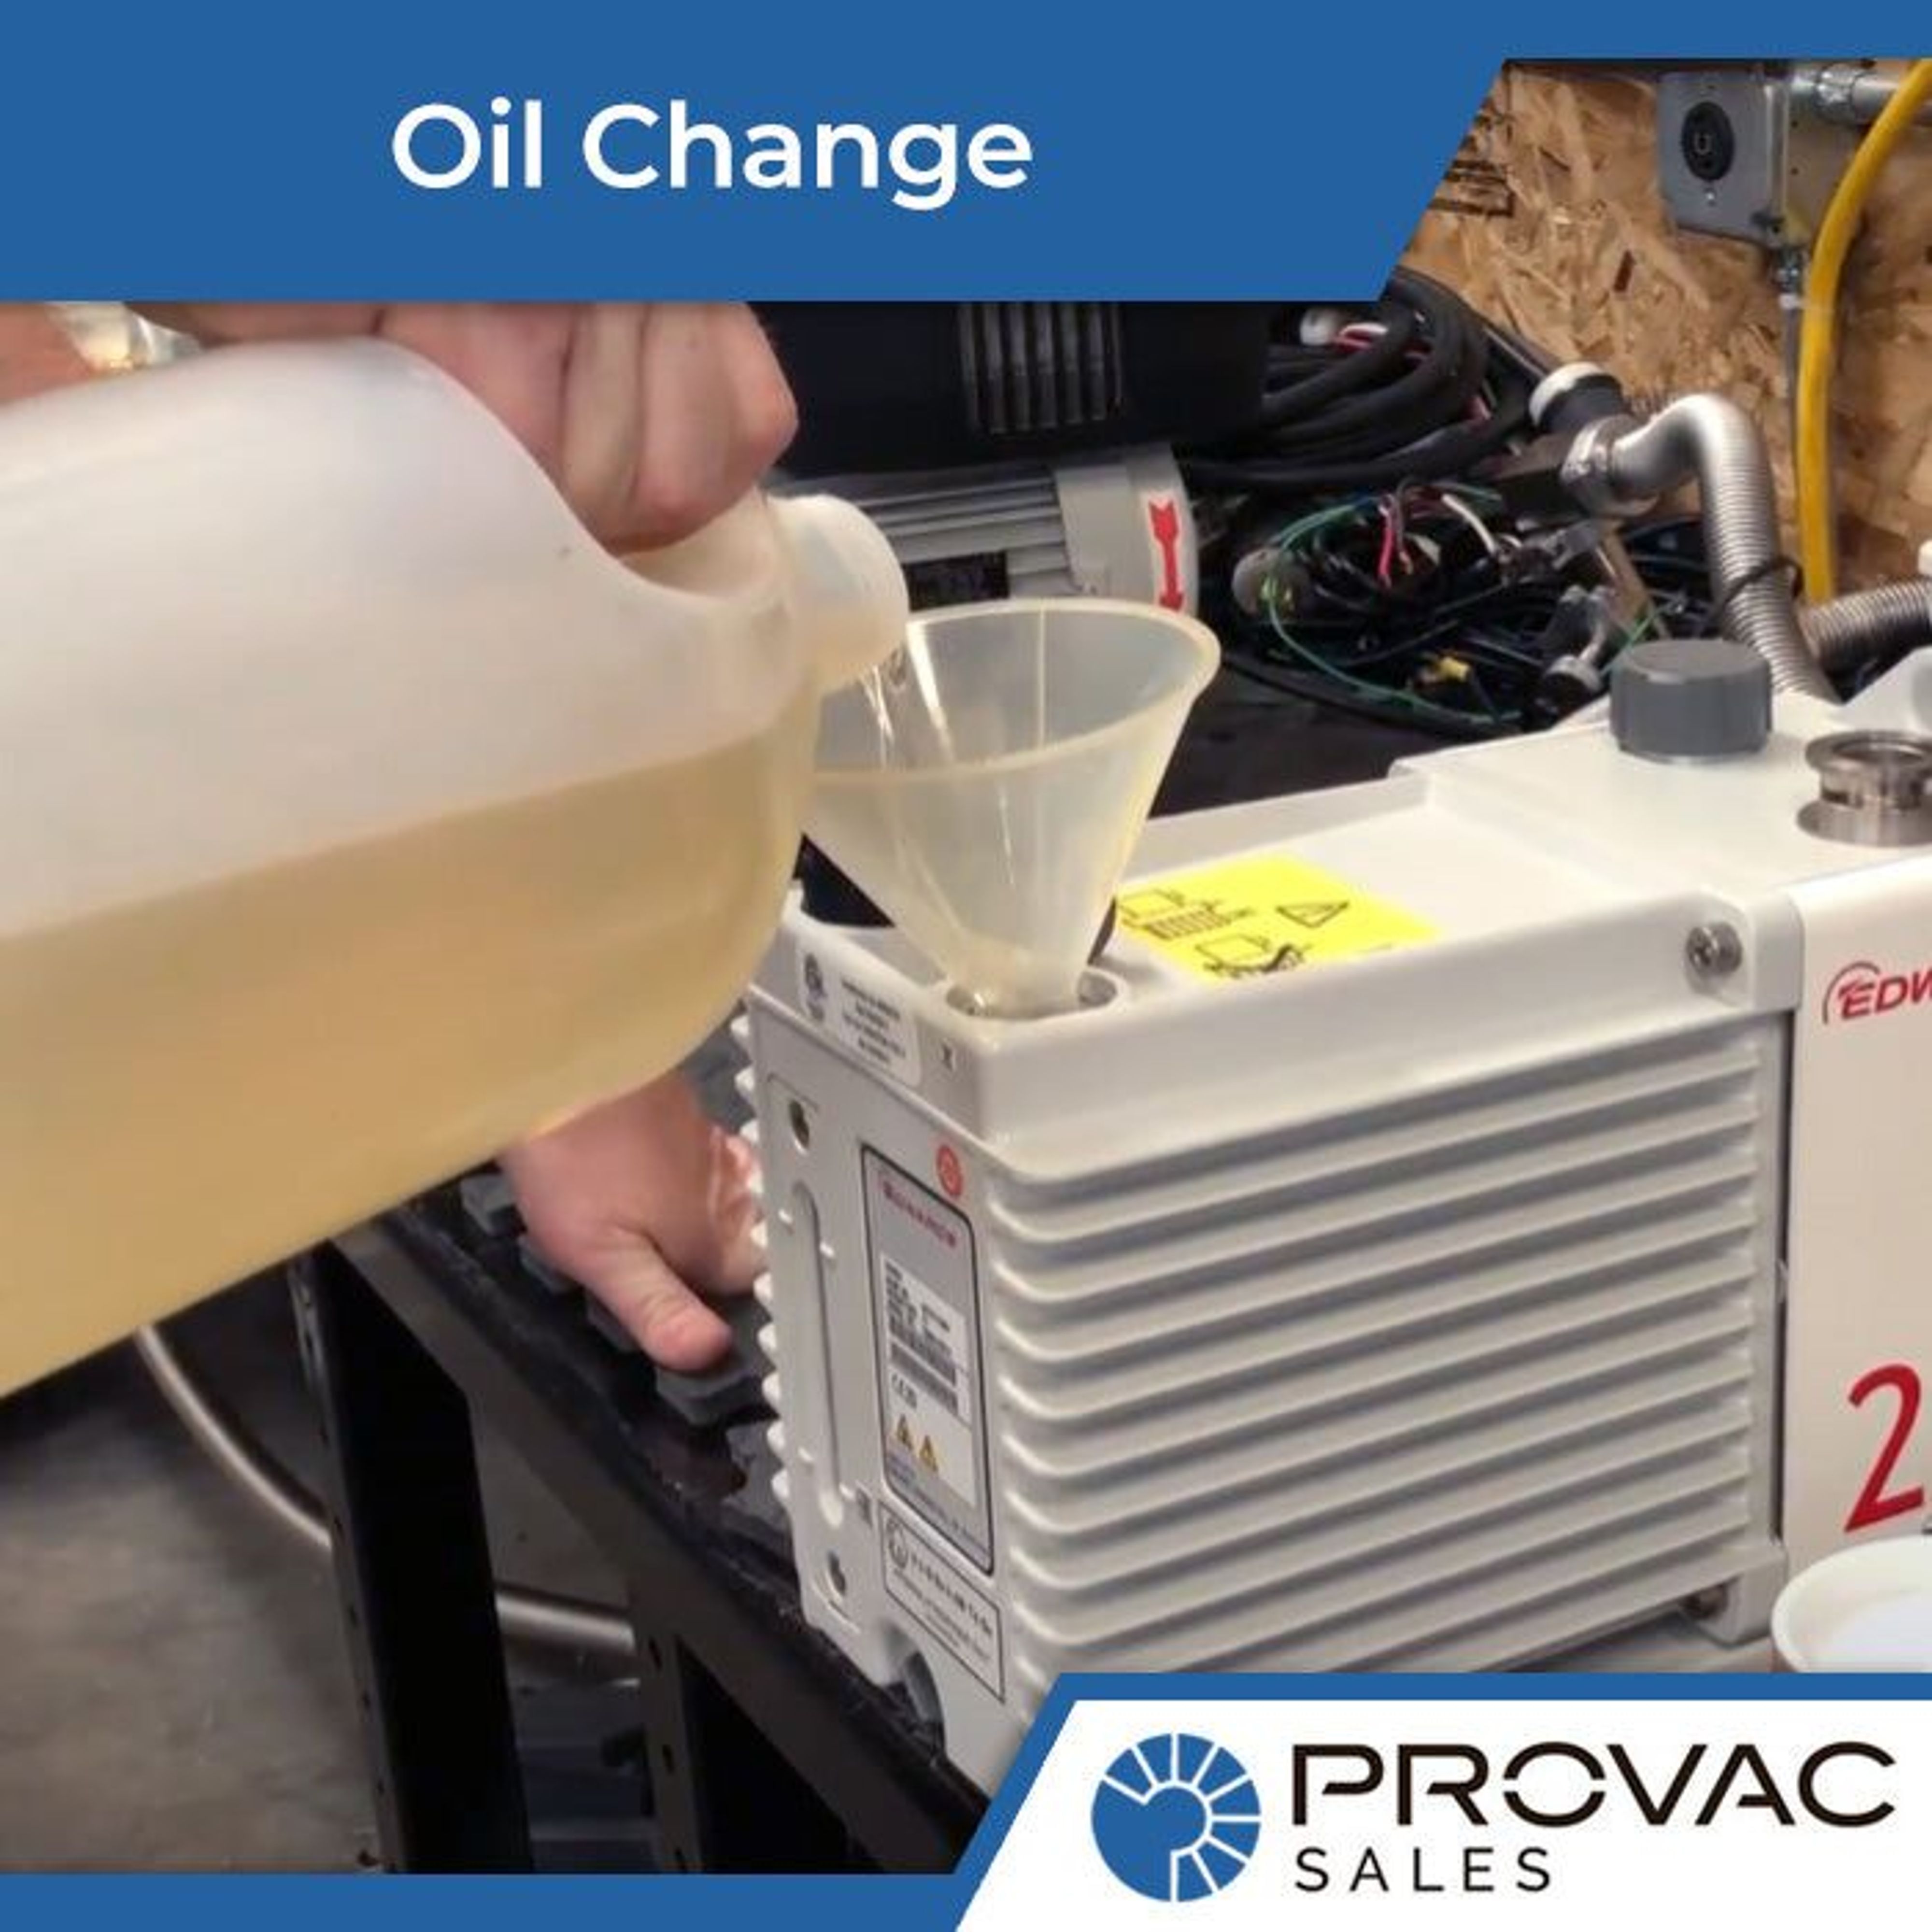 Oil Changes in Rotary Vane Vacuum Pumps Background